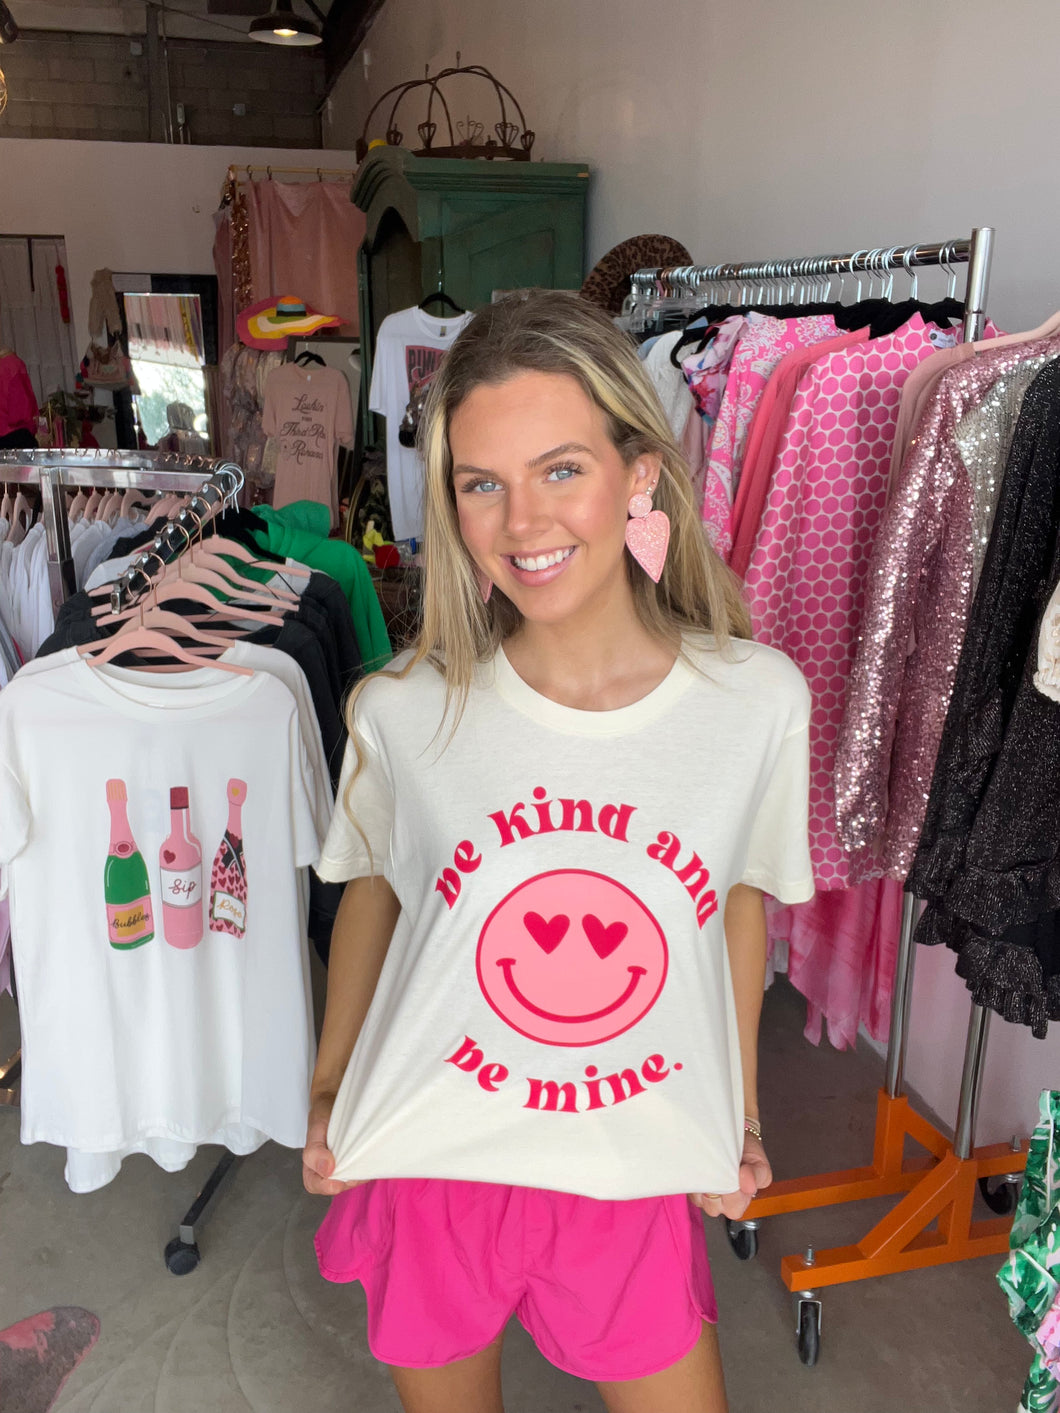 Be kind and be mine t-shirt